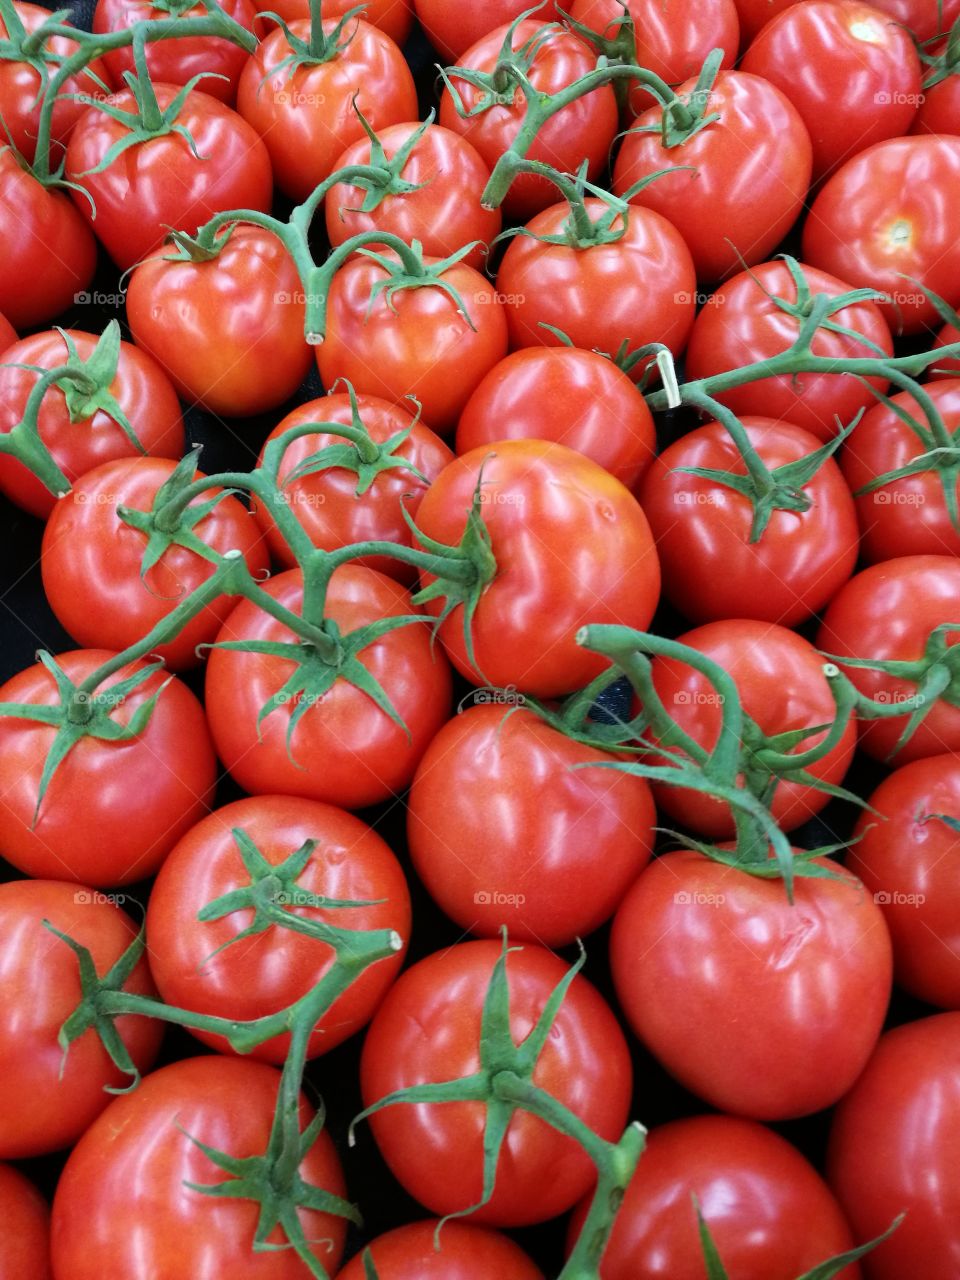 background of ripe tomatoes